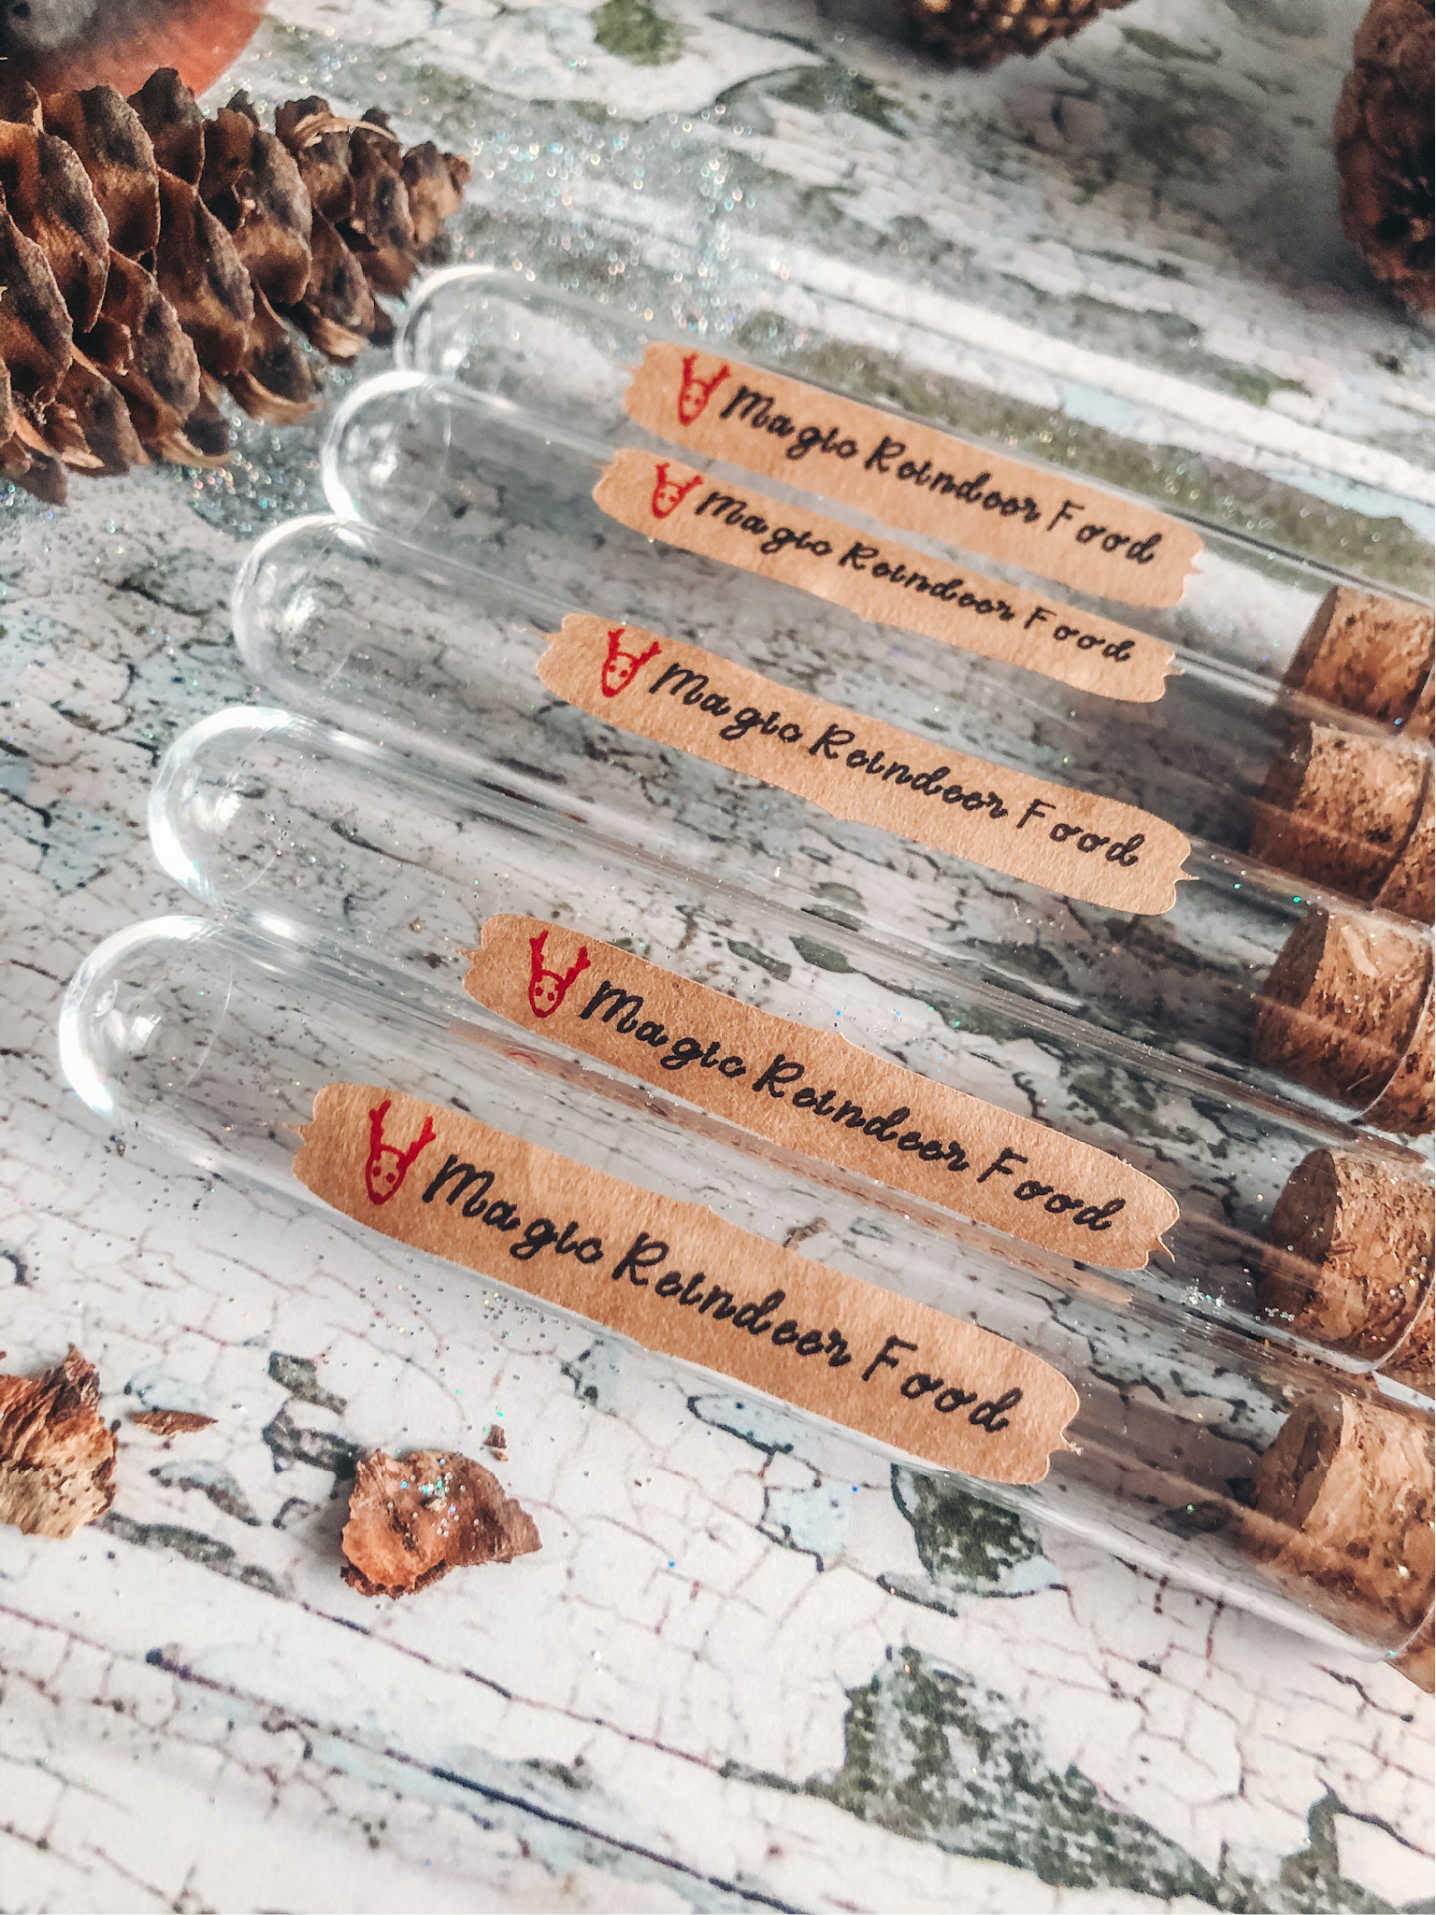 Add the smart labels to plastic test tubes with cork tops to create your Magic reindeer food tubes